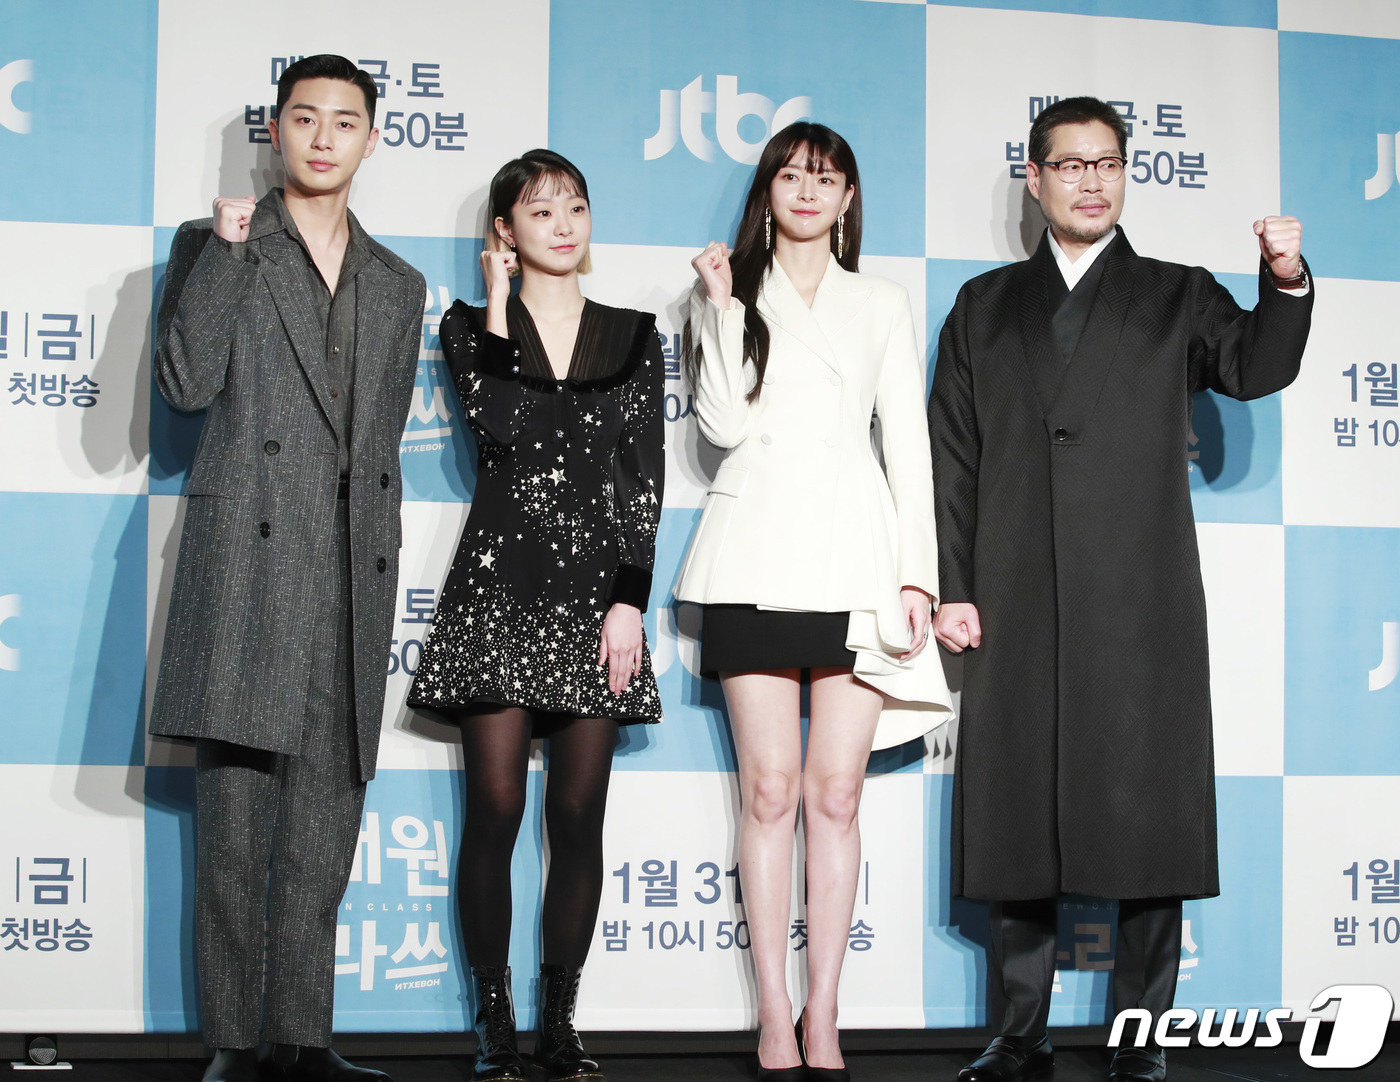 On the afternoon of the 30th, a production presentation of JTBC Itaewon Klath (playplayplay by Jo Kwang-jin/directed by Kim Seong-yoon) was held at the Conrad Seoul Hotel in Yeongdeungpo-gu, Seoul.Actor Park Seo-joon Kim Da-mi Yoo Jae-myung Kwon Nara, Kim Seong-yoon PD and Jo Kwang-jin writer attended the ceremony.Itaewon Clath is a drama based on the next webtoon of the same name. It is a work that depicts the hip rebellion of youths who are united in unreasonable world, stubbornness and guest.The myth of the start-up of those who pursue freedom with their own values ​​will be dynamically unfolded in the small streets of Itaewon, which seems to have compressed the world.Park Seo-joon endured all kinds of hardships and played Park Sae-roi, who opened Sanbam Foa in Itaewon with money for seven years.Kim Da-mi gave up his admission to prestigious universities and played Joe-yool Lee, who is a manager of Danbam, and Kwon Nara is the head of the strategic planning team of Janga and the role of SuA, which regards himself as the most precious and precious.Yoo Jae-myung plays Jang Dae-hee, the chairman of Janga and blocking the front of Park Sae-roi.Kim Seong-yoon PD said, Itaewon Clath is the first drama of the filmmaker Showbox. It seems that there is freshness that the union gives, he said. The writer is also the first author to write the drama, I am the first drama in JTBC, and the first drama to produce the showbox.Showbox is now doing well in the movie Namsans Managers, and I hope that the atmosphere will continue well (to Itaewon Clath).Jo Kwang-jin, who has been writing the original webtoon and the drama drama, talked about the difficulty of the drama writing process.Cho said, It was the opportunity for me to participate that no one had ever written a drama, he said. I thought it was easy to write because I was a cartoonist who was doing all the writing, but I felt it was difficult to write.In the meantime, Cho said, But I met a very good person, he said. I thought it was my master and I got a lot of help.Park Seo-joon said of Itaewon Clath that Drama itself does not have a story that is far from the original because there is a famous original work in so far.It seems that a little more interesting story will be broadcast with the addition of it.Park Seo-joon said, I was attracted to this drama because I felt the charm of Remady in the role to express it. I also took a lot of effort to express such a delicate part.Kim Da-mi said, I read it in three hours as soon as I saw the webtoon, he said. It was so fun and interesting.I felt that the character called Joe-yool Lee was a character I had not seen before, so I thought it would be fun to act, he said. When I met the director, I joined him because he suggested that I could make my own Joe-yol Lee.Kwon Nara talked about the effort she put in while playing SuA in the play.Kwon Nara said, In the original work, there was not much remady of SuA. But Remady is well melted in Drama.I am trying to express the newness of my childhood, the youthful youth, and the inevitable difficulties of my childhood. Yoo Jae-myung said, I think that every time I do a work, I do not think it is a villain, but I act. I always have a reason and a conviction, and I thought that one side of his own curved life history was the present, He said.I think I am not, but I saw a lot of old-fashioned people, said Yoo Jae-myung, who was a top model for the elderly. So I personally was a big top model.I tried to play it naturally, not just imitating it while making special makeup. Yoo Jae-myung explained, I have a lot of skin damage because I am making a special makeup, but I think that when I finish this work, I will get a lot of wrinkles.Jo Kwang-jins confidence in these actors is also high.Its 120%, Cho said, referring to the synchro rate of the original and the actors. From a certain moment, the actors interpret and implement the characters, and they cried.Im so happy, he said.He also made a commitment to ratings.Park Seo-joon said, If the audience rating exceeds double digits, we are running Foa called Sweet Night in the play, so I would like to suggest that we should try it as an event. I hope you have time to actually spend with viewers.If it becomes a double digit, I would like to meet with viewers at Foa. Meanwhile, Itaewon Clath will be broadcasted at 10:50 pm on the 31st.